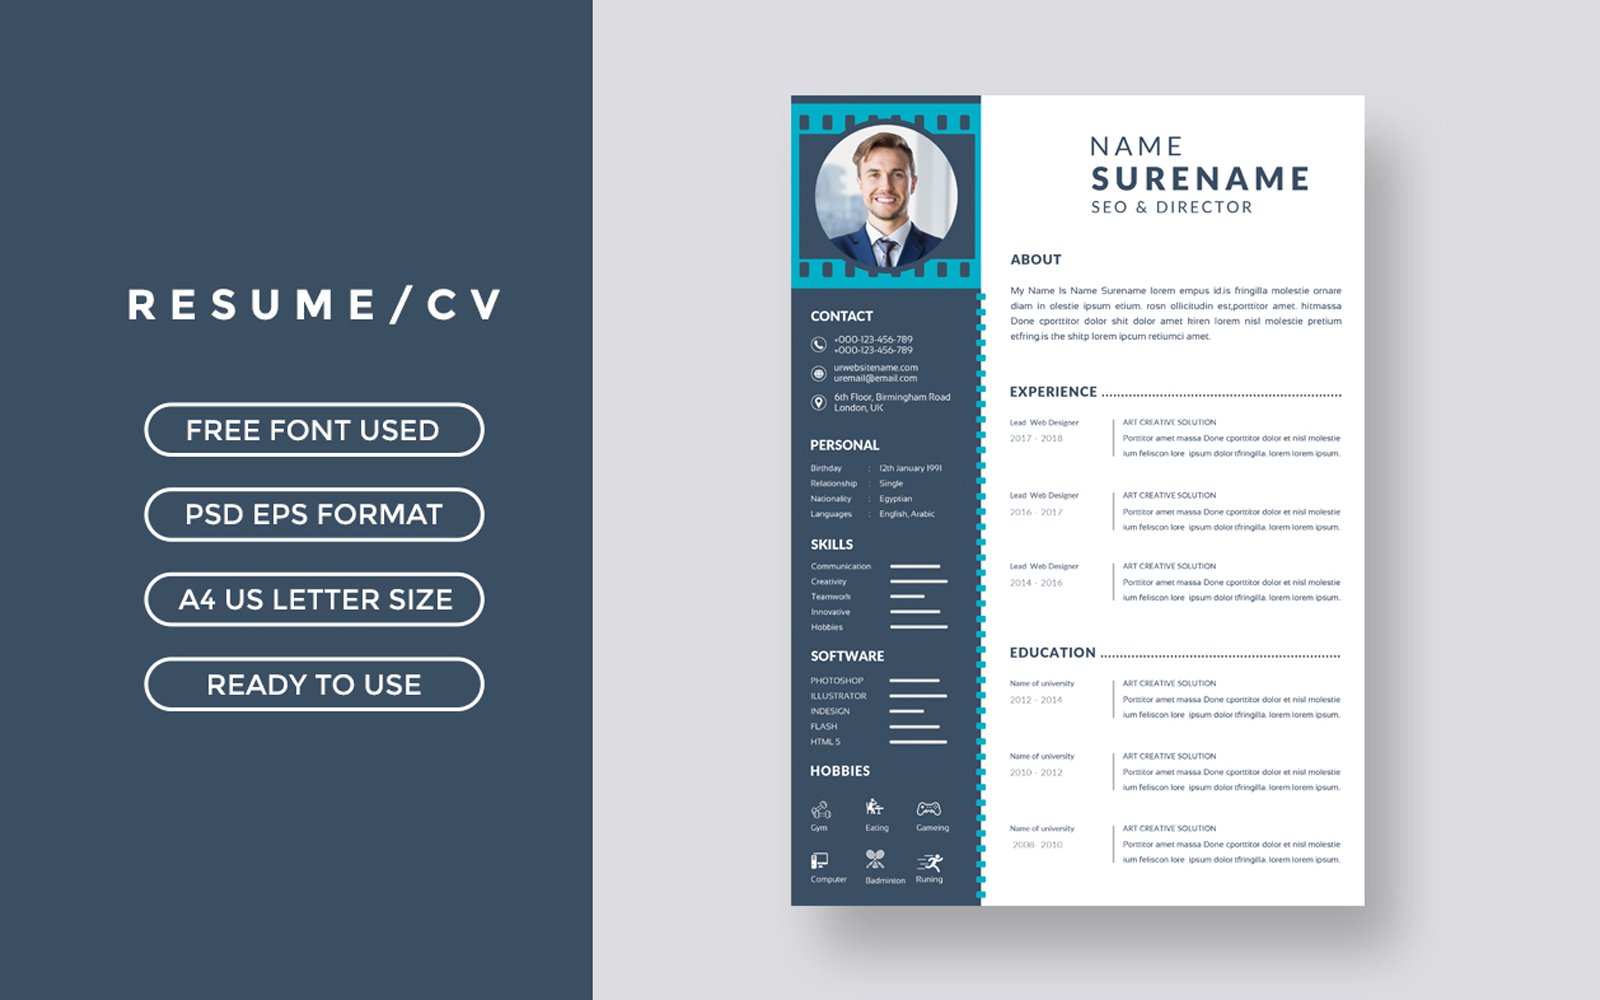 Template #398114 Resume Cover Webdesign Template - Logo template Preview